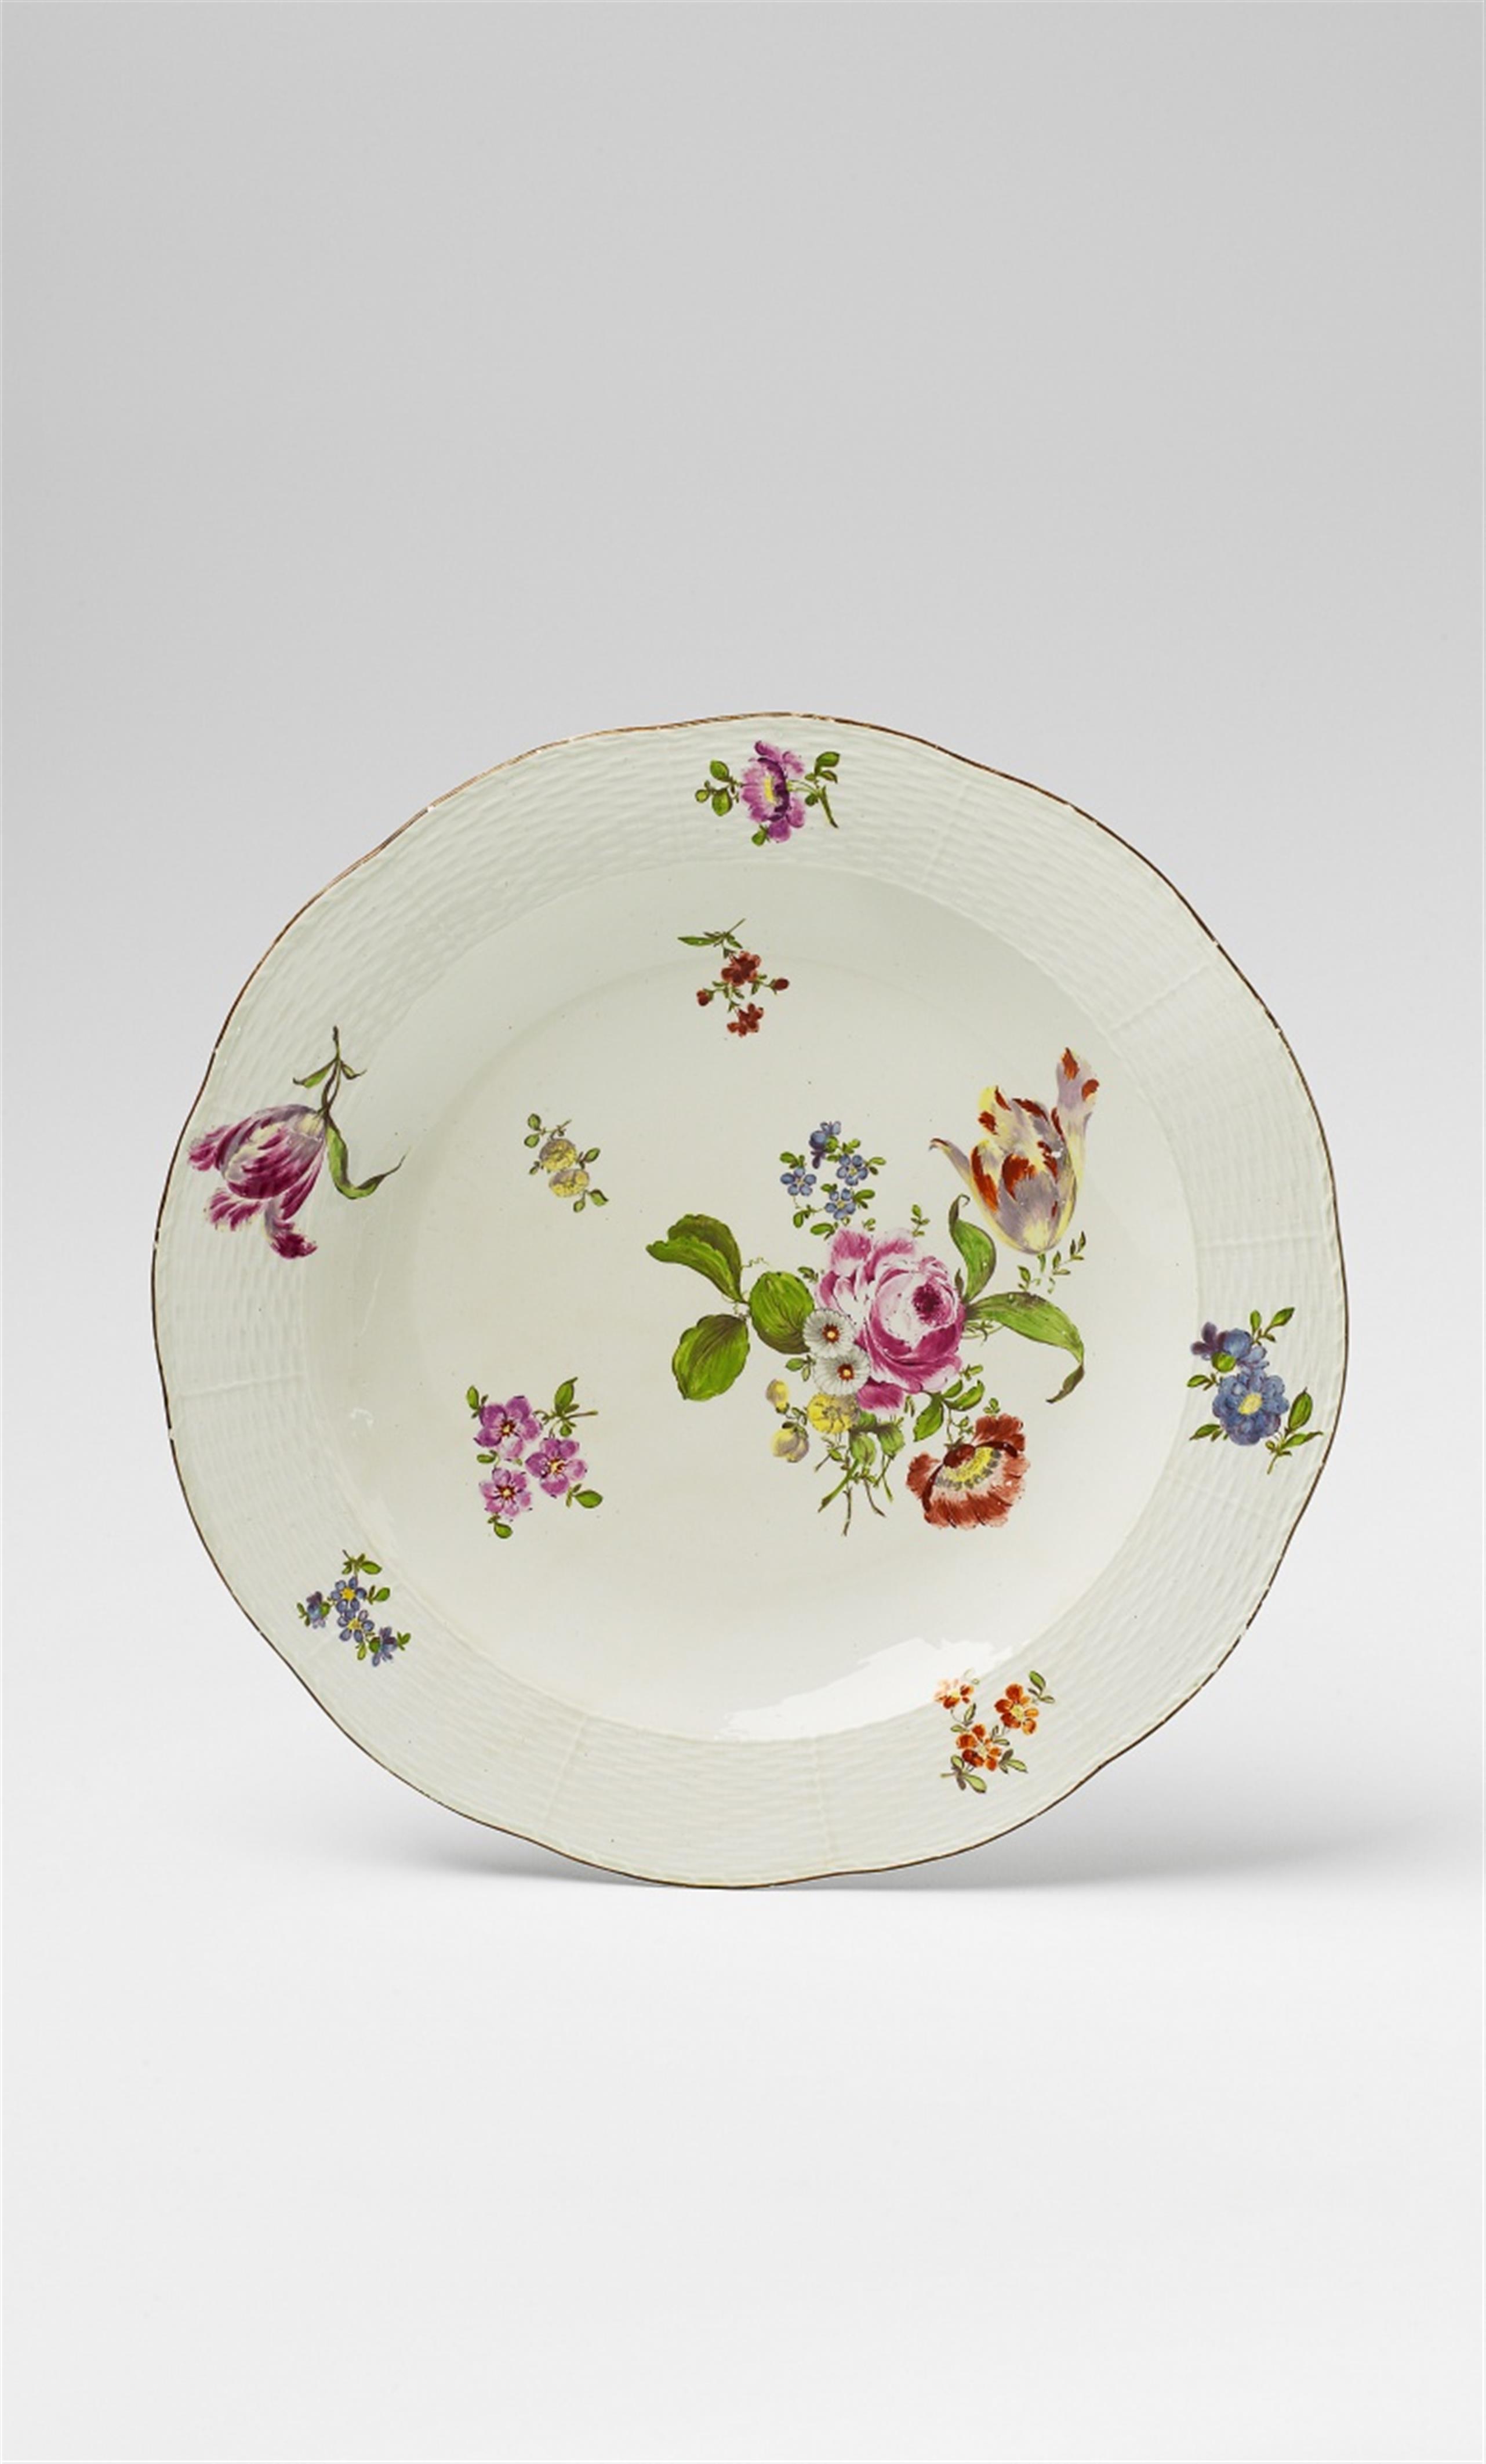 An early Berlin KPM porcelain platter with floral decor - image-1